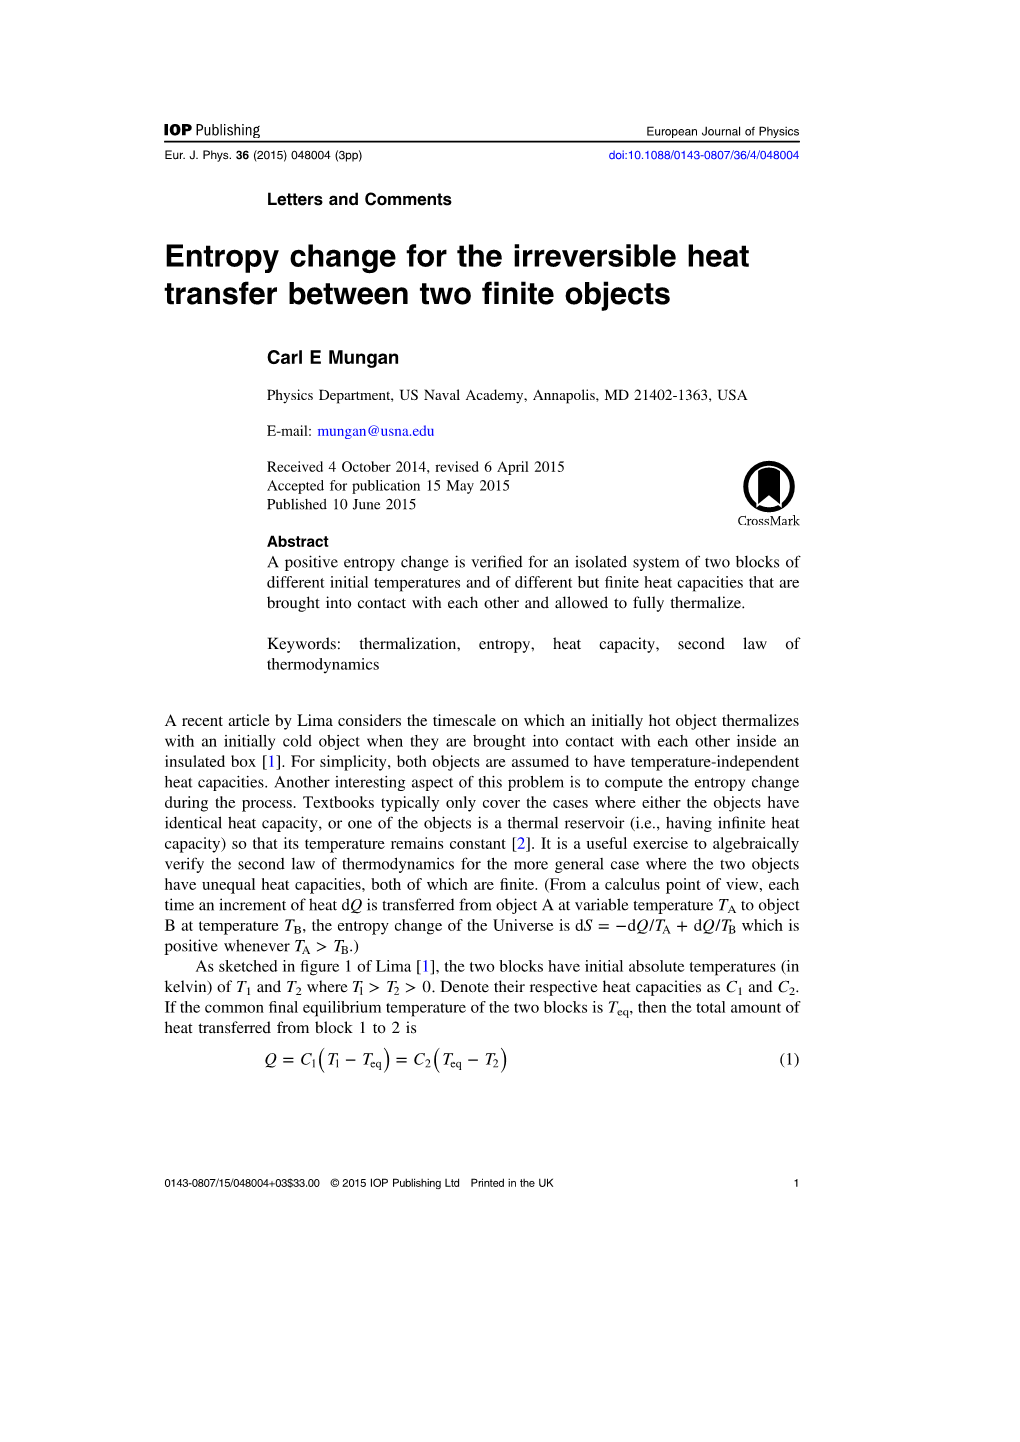 Entropy Change for the Irreversible Heat Transfer Between Two Finite